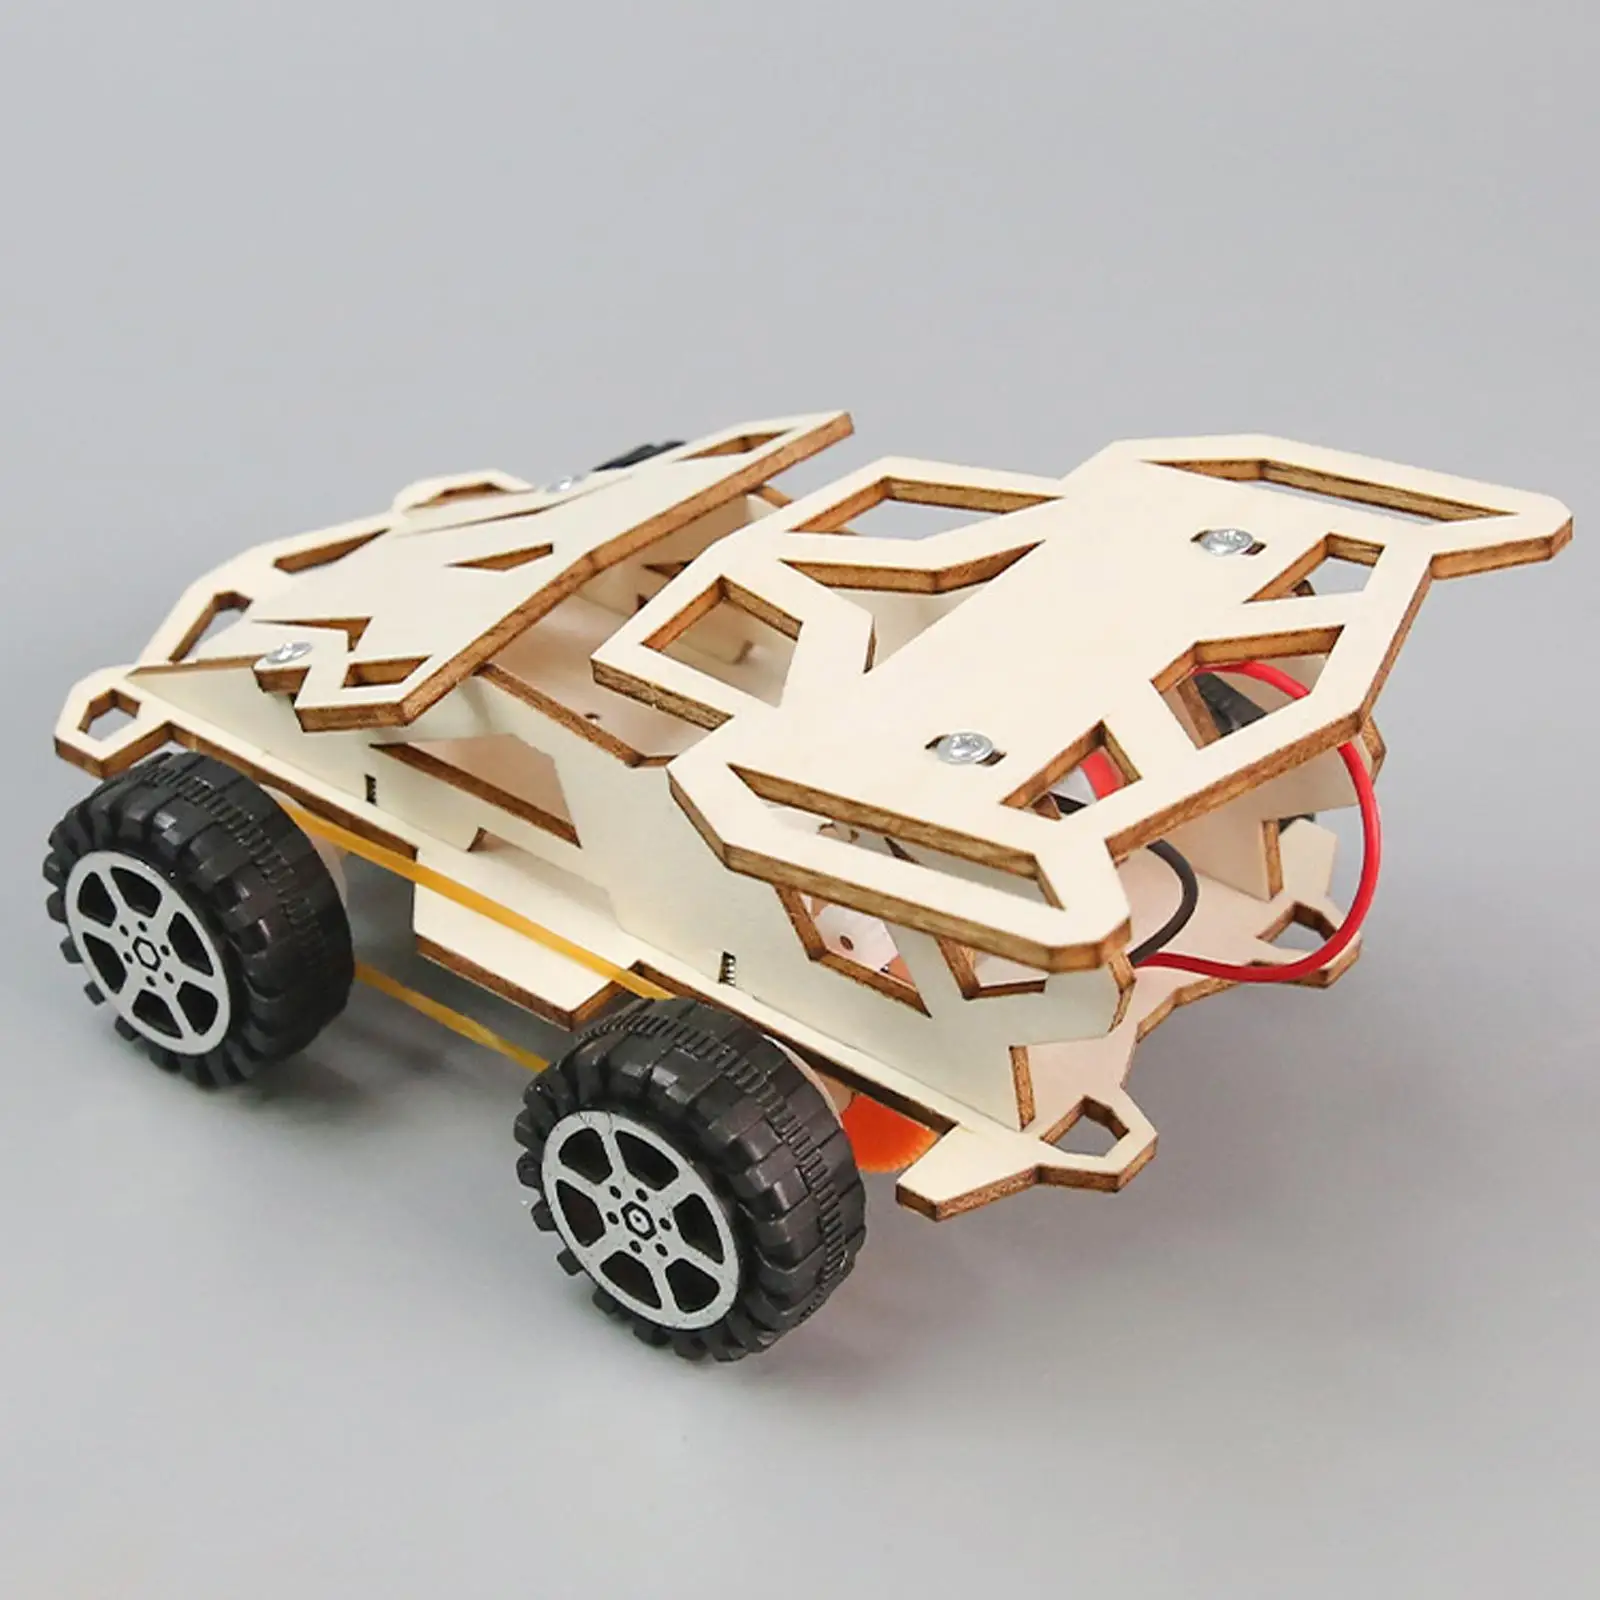 Mini Car Model s Vehicle Building s Wood Puzzles New Year Gifts